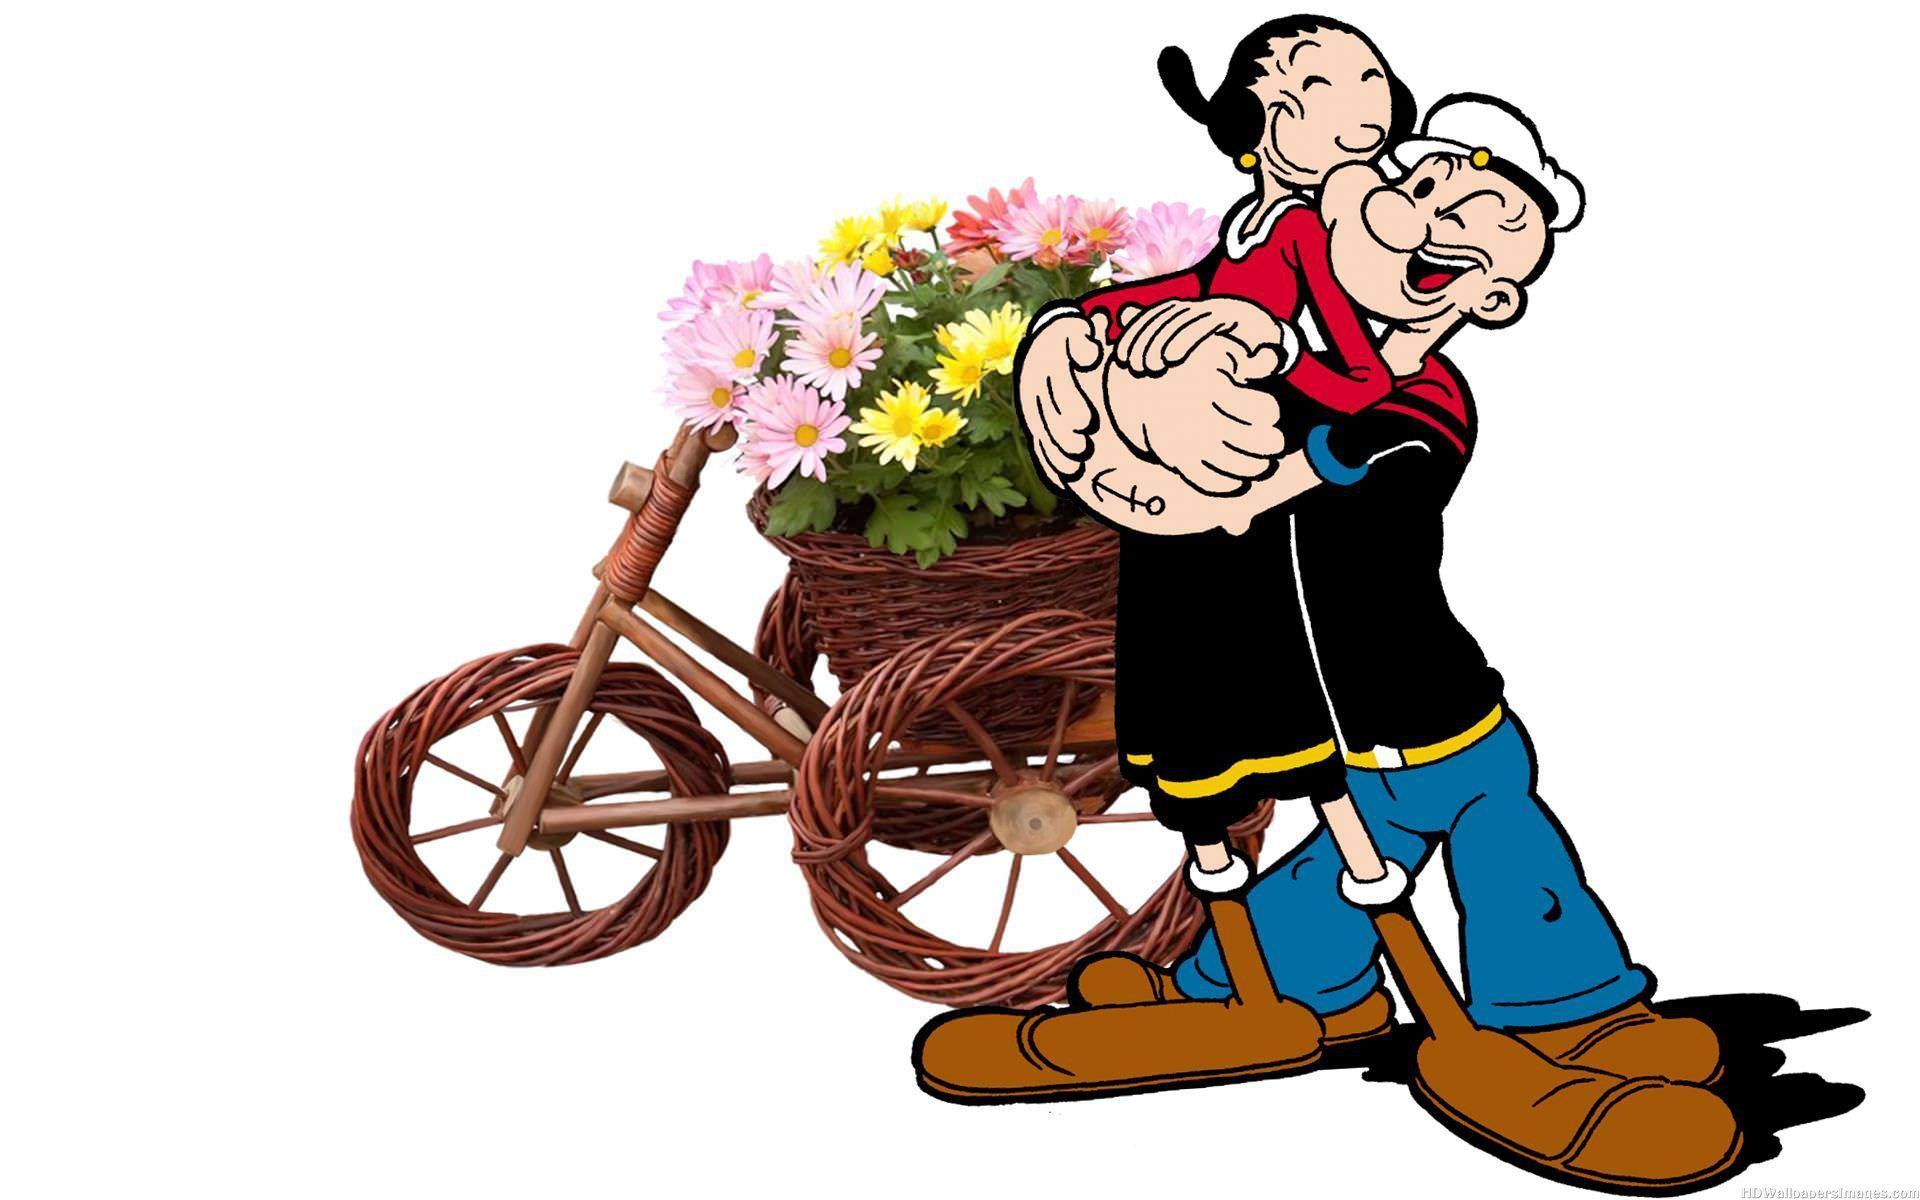 100+] Popeye Wallpapers | Wallpapers.com